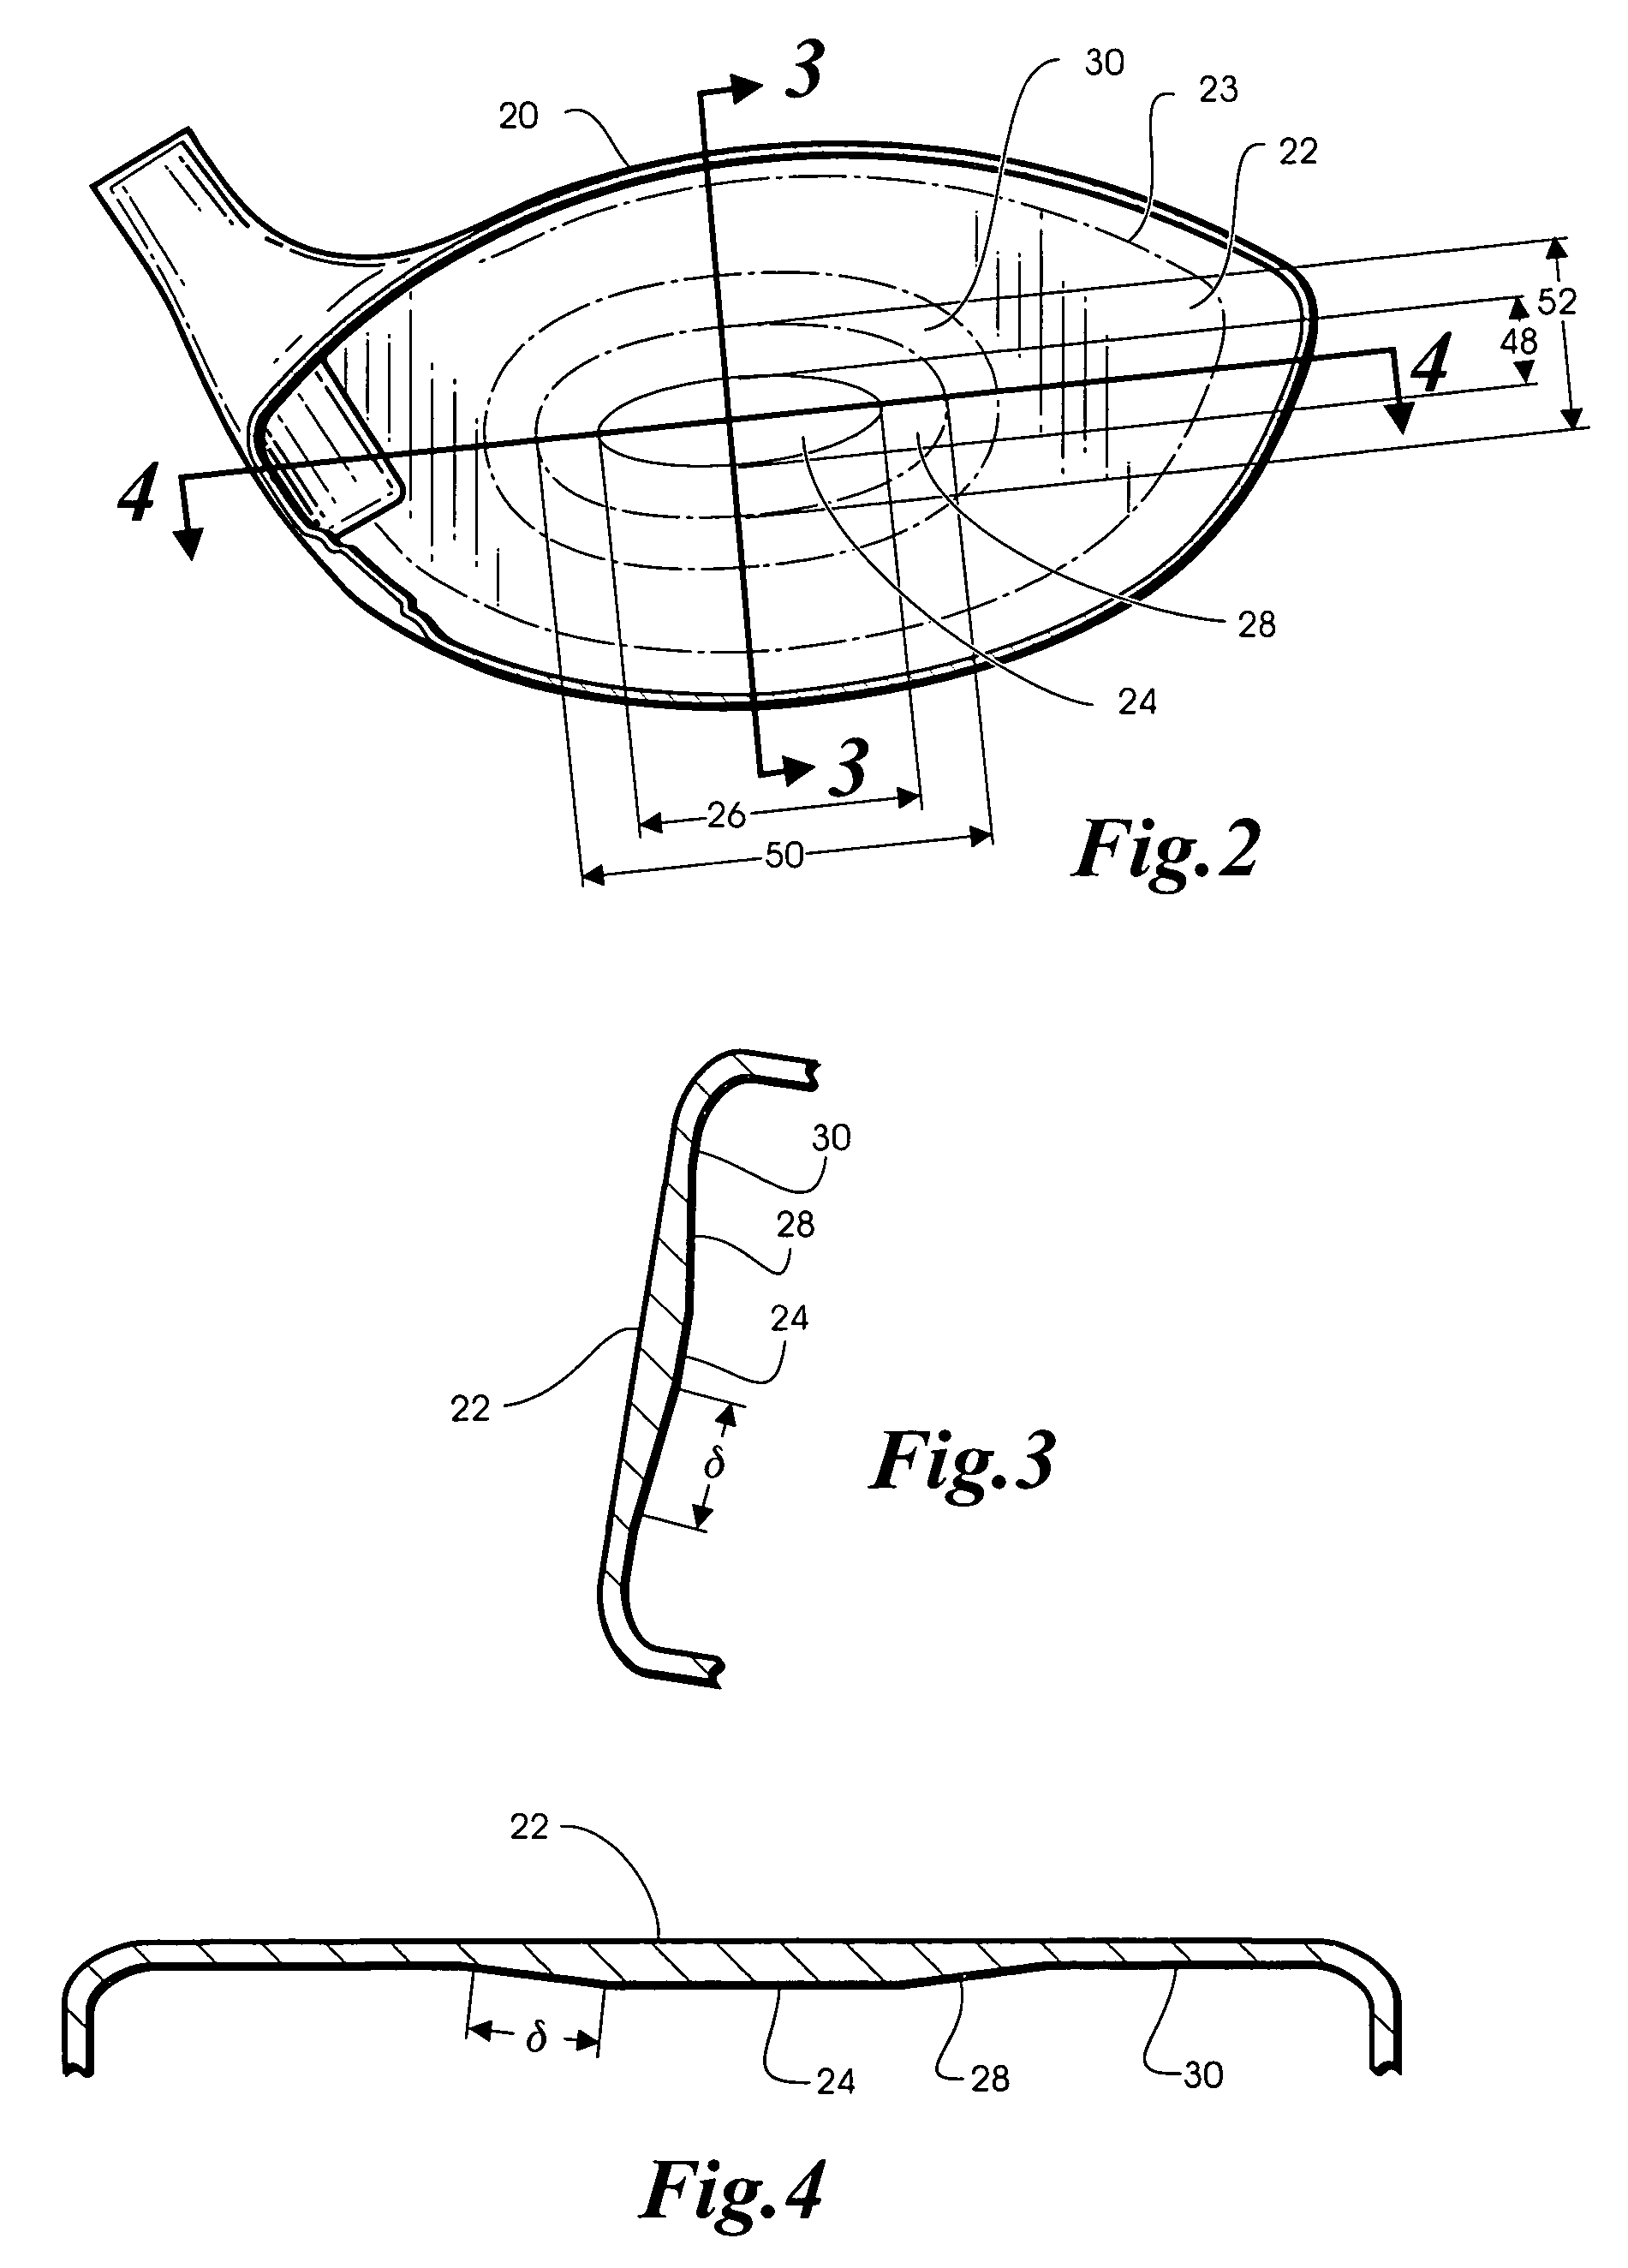 Method of manufacturing a face plate for a golf club head